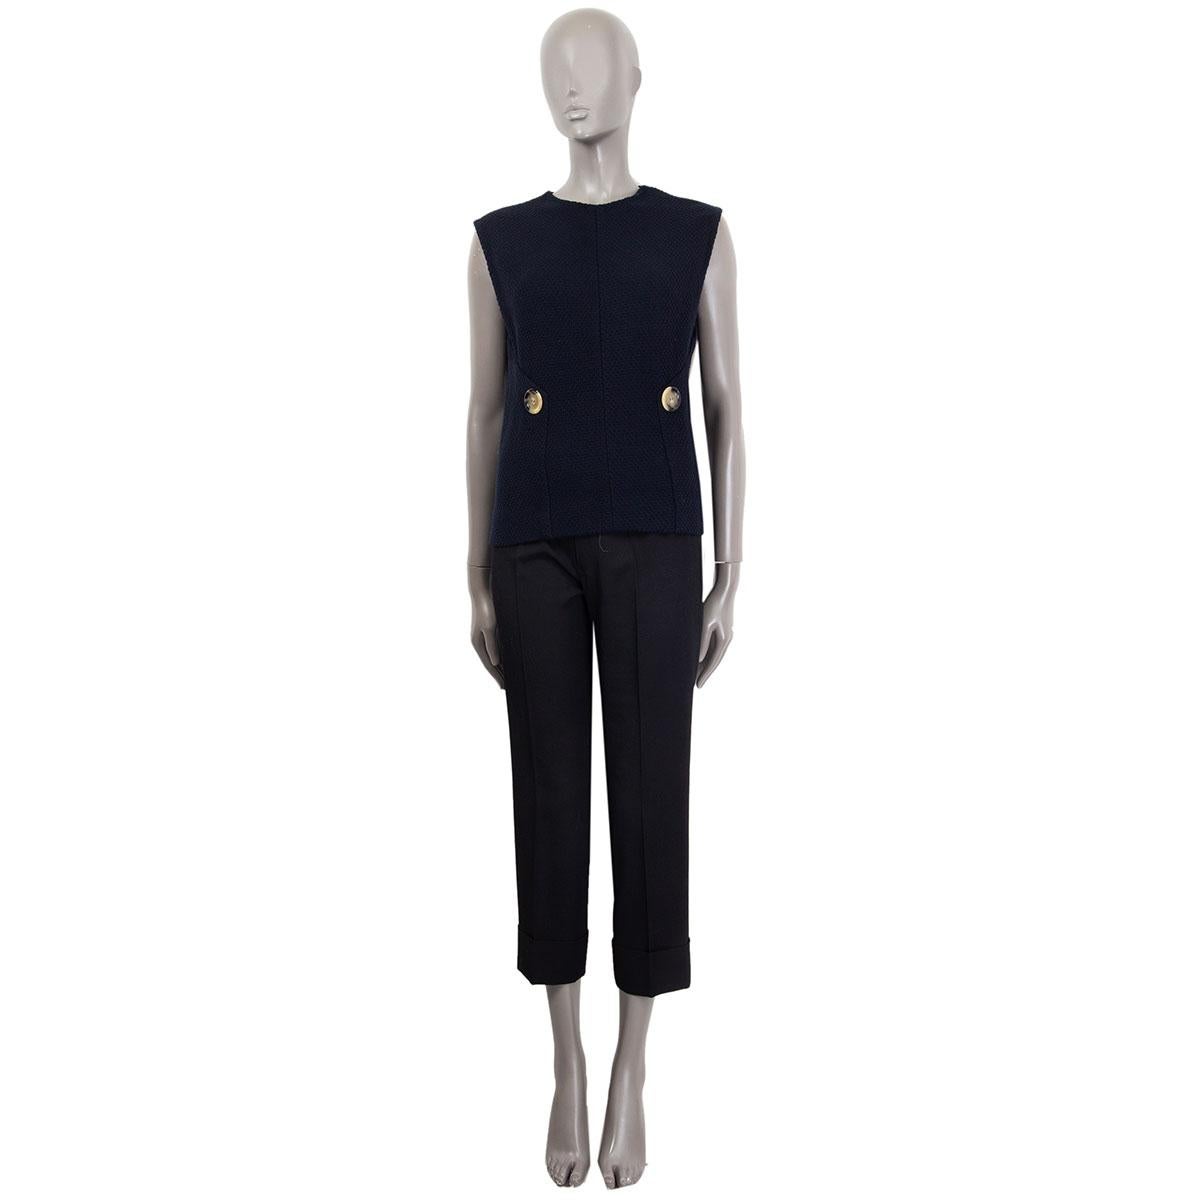 100% authentic Victoria Beckham textured vest with two-button detail in midnigh blue in wool(82%), polyamide (16%) and elasatne (2%). Opens with a zipper on the back. Has been worn and is in excellent condition. 

Measurements
Tag